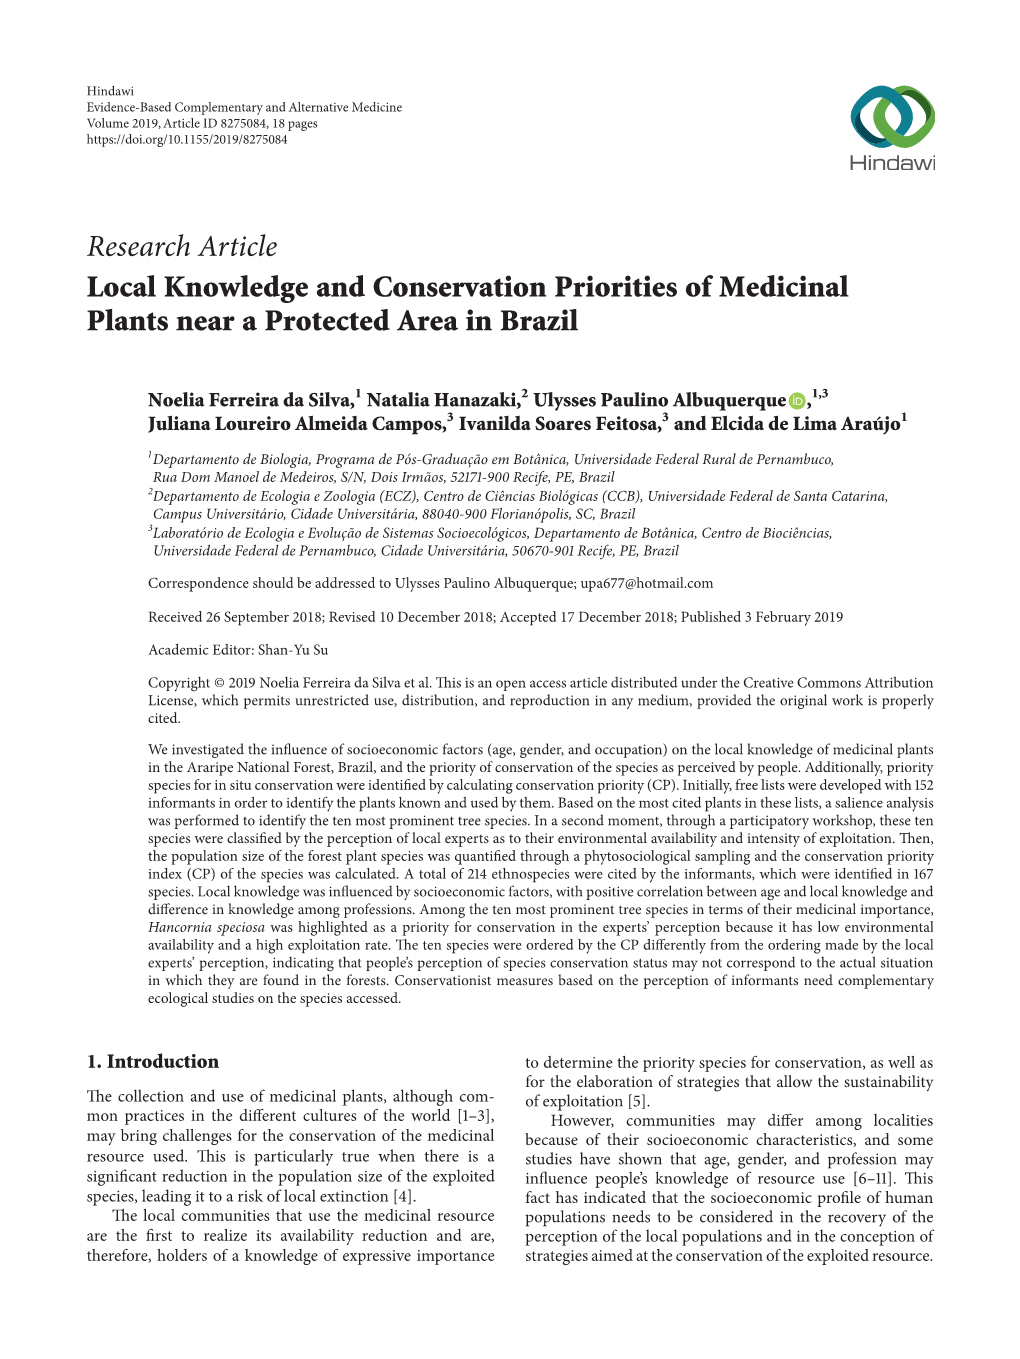 Research Article Local Knowledge and Conservation Priorities of Medicinal Plants Near a Protected Area in Brazil